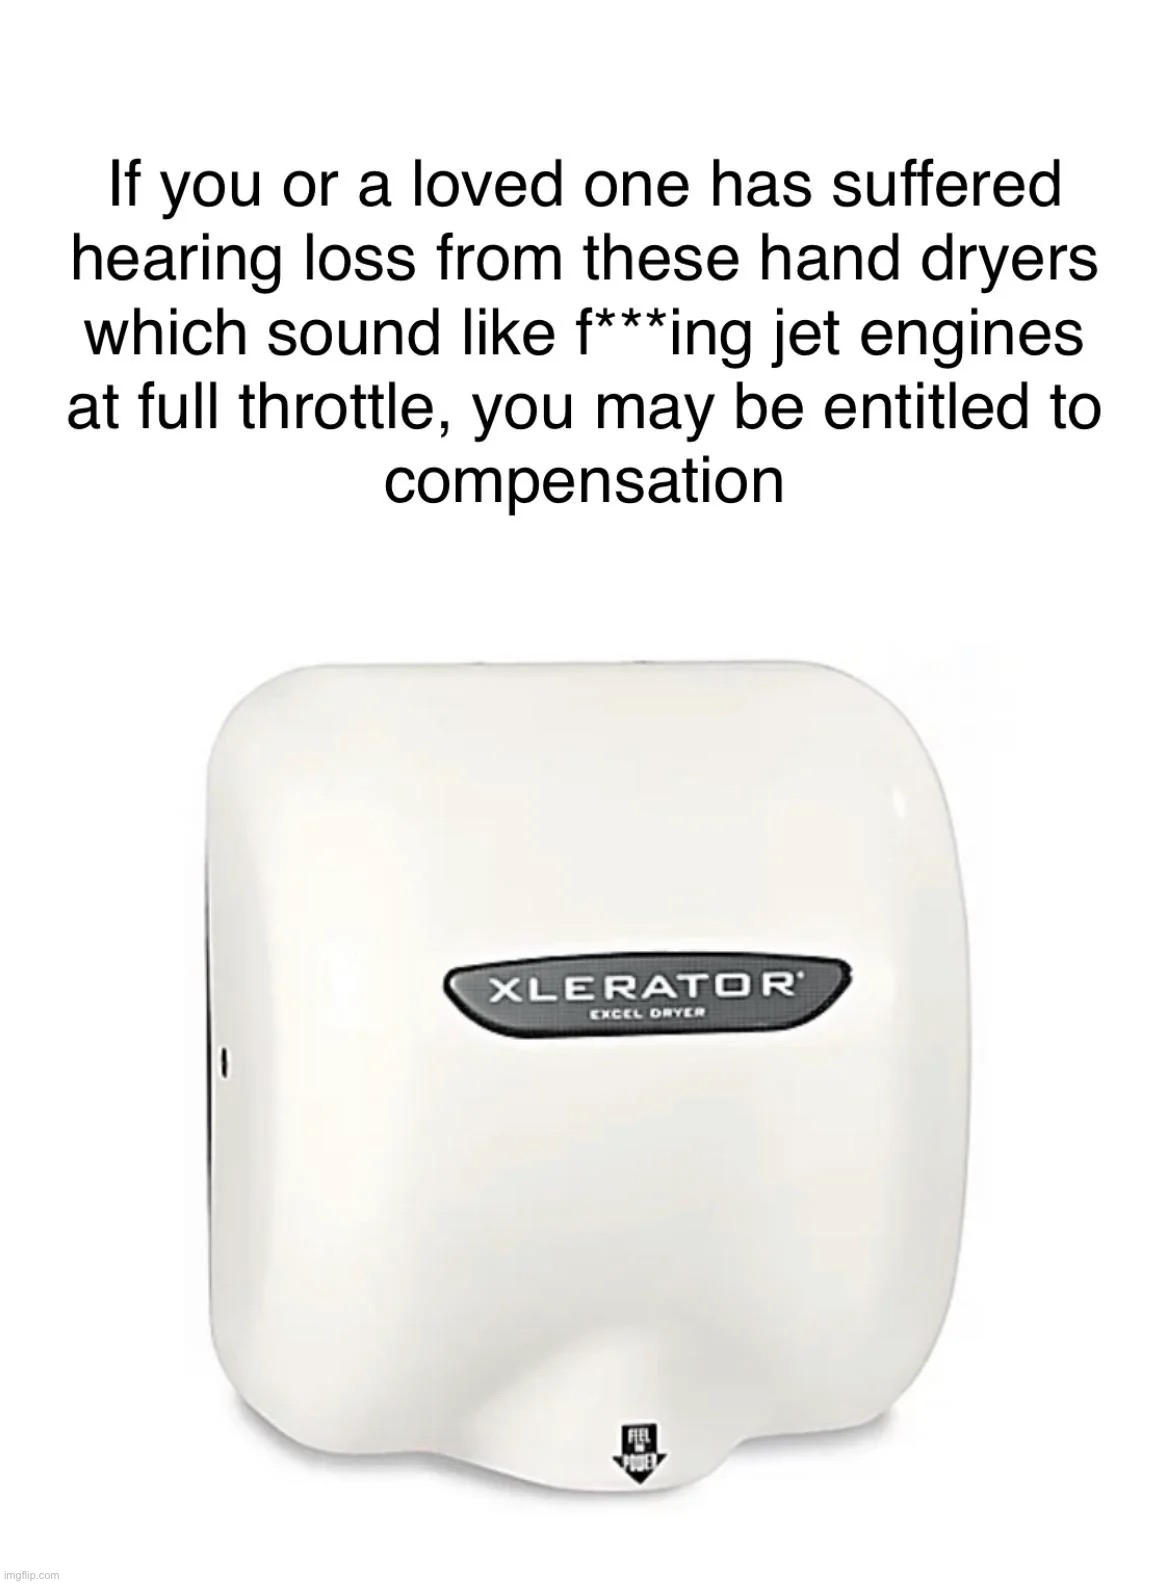 these were so freaking loud bro (and basic towels cleaned better anyways) | image tagged in hand dryer,hearing loss,pain,memes,repost | made w/ Imgflip meme maker